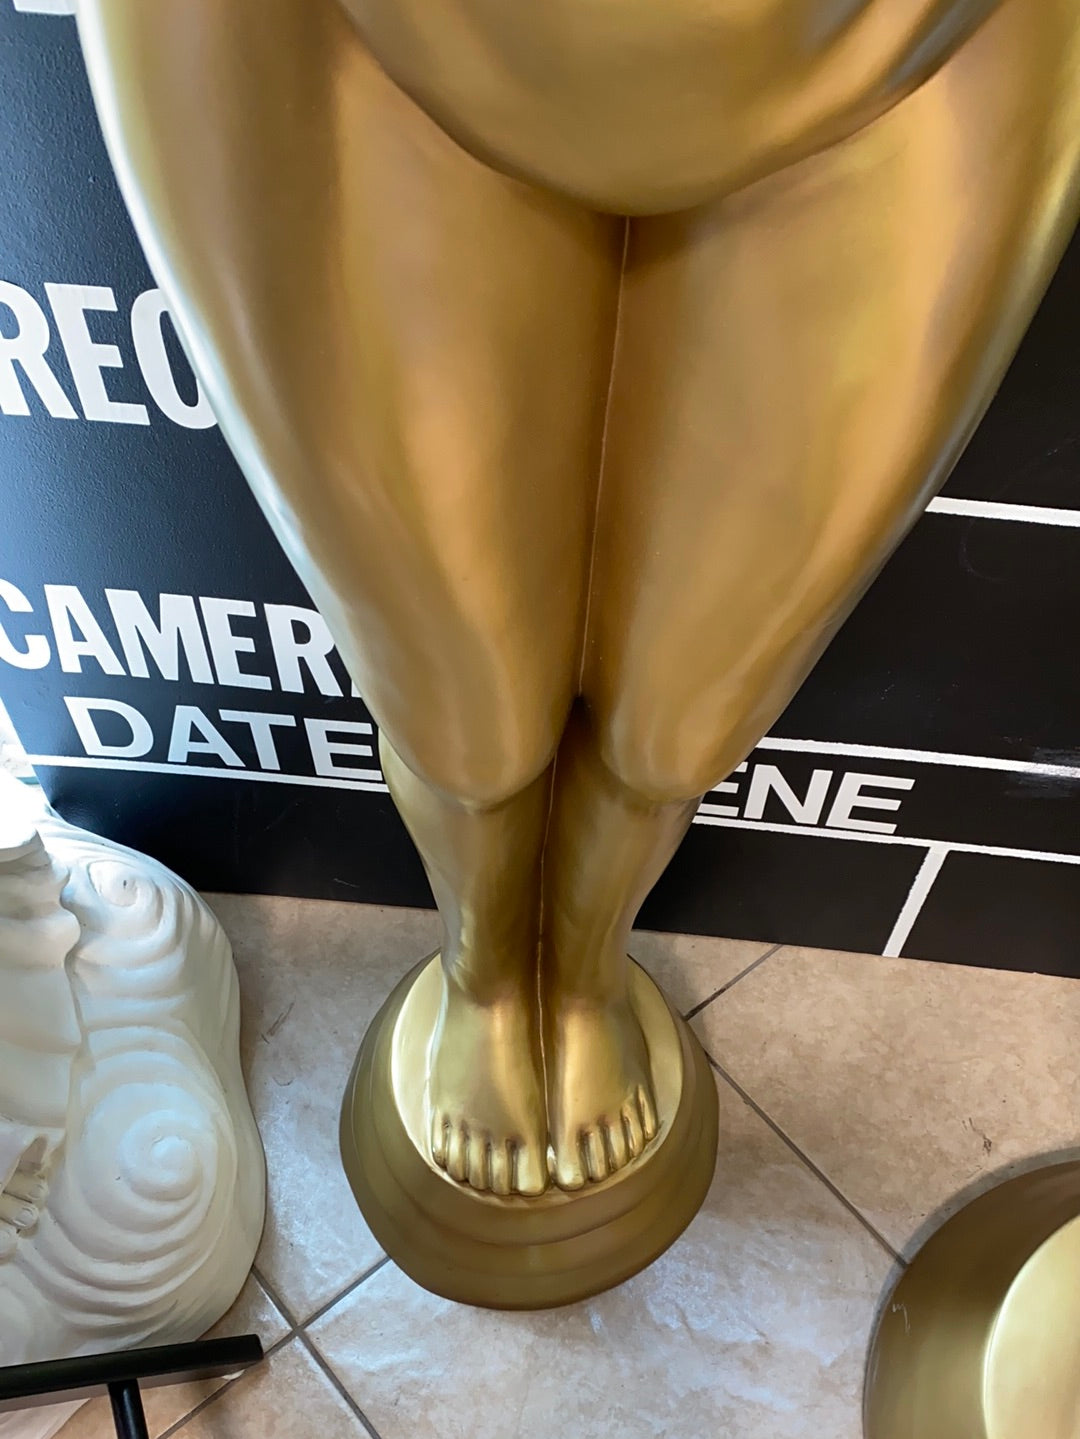 Movie Trophy Life Size Statue